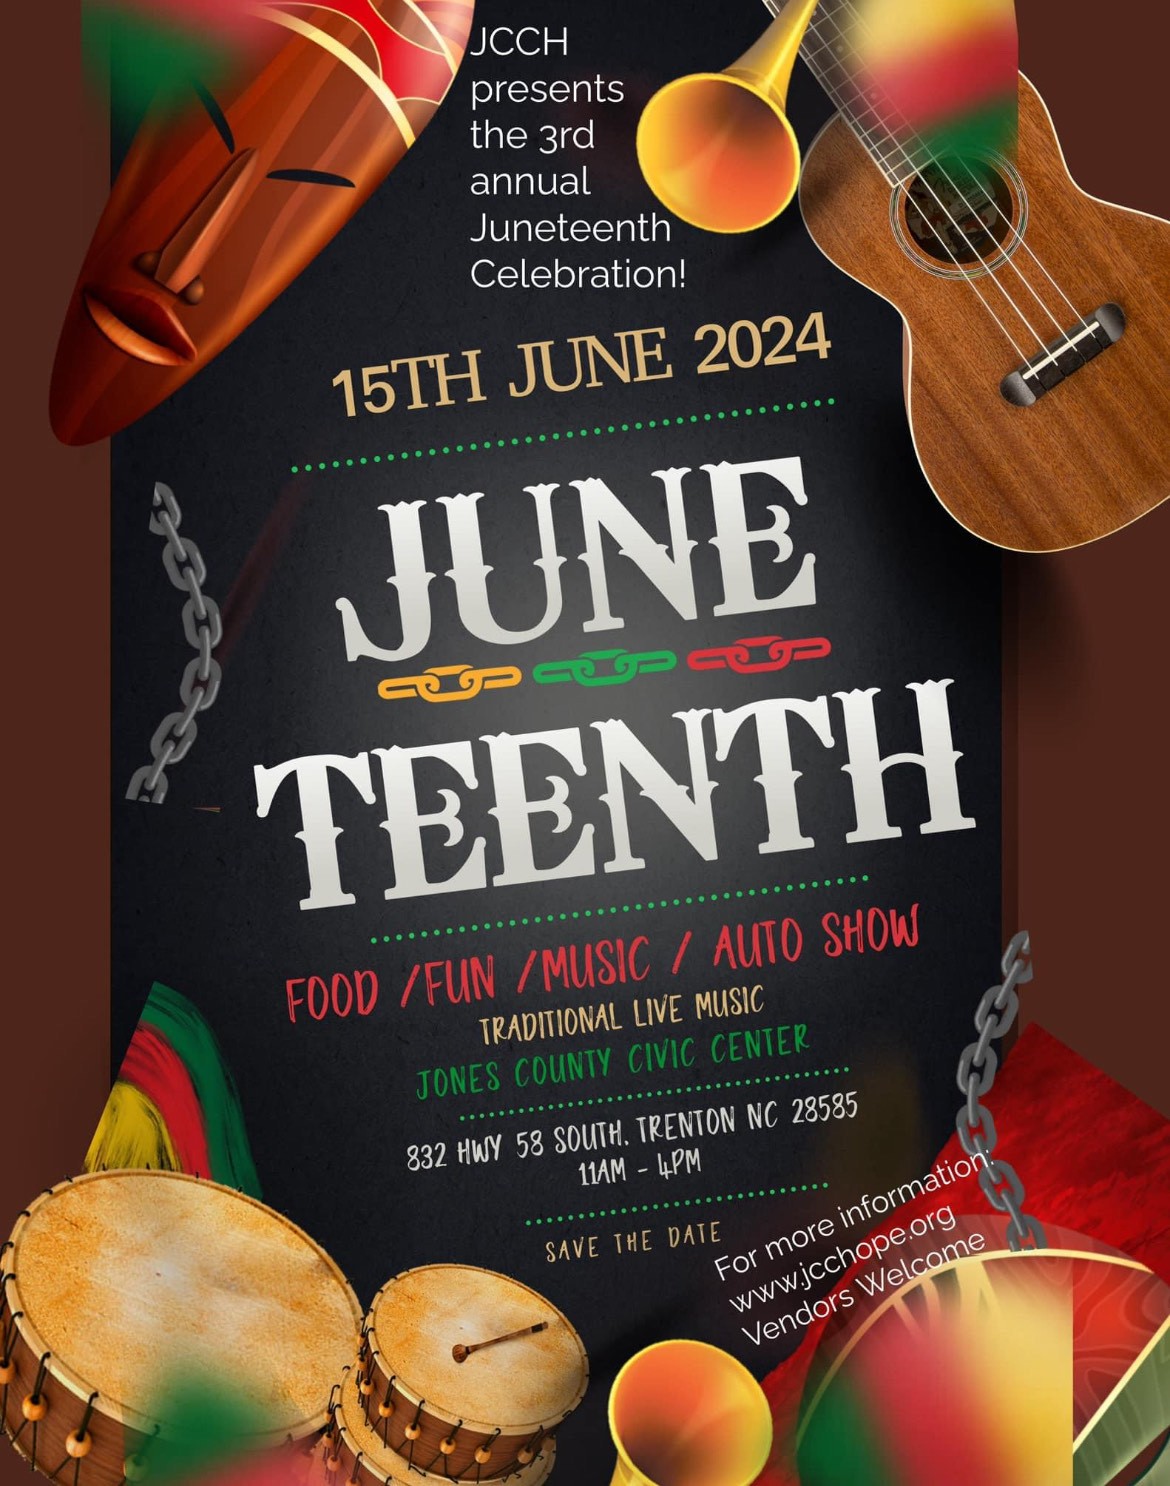 JCCH Presents The 3rd Annual Juneteenth Celebration / Car Show